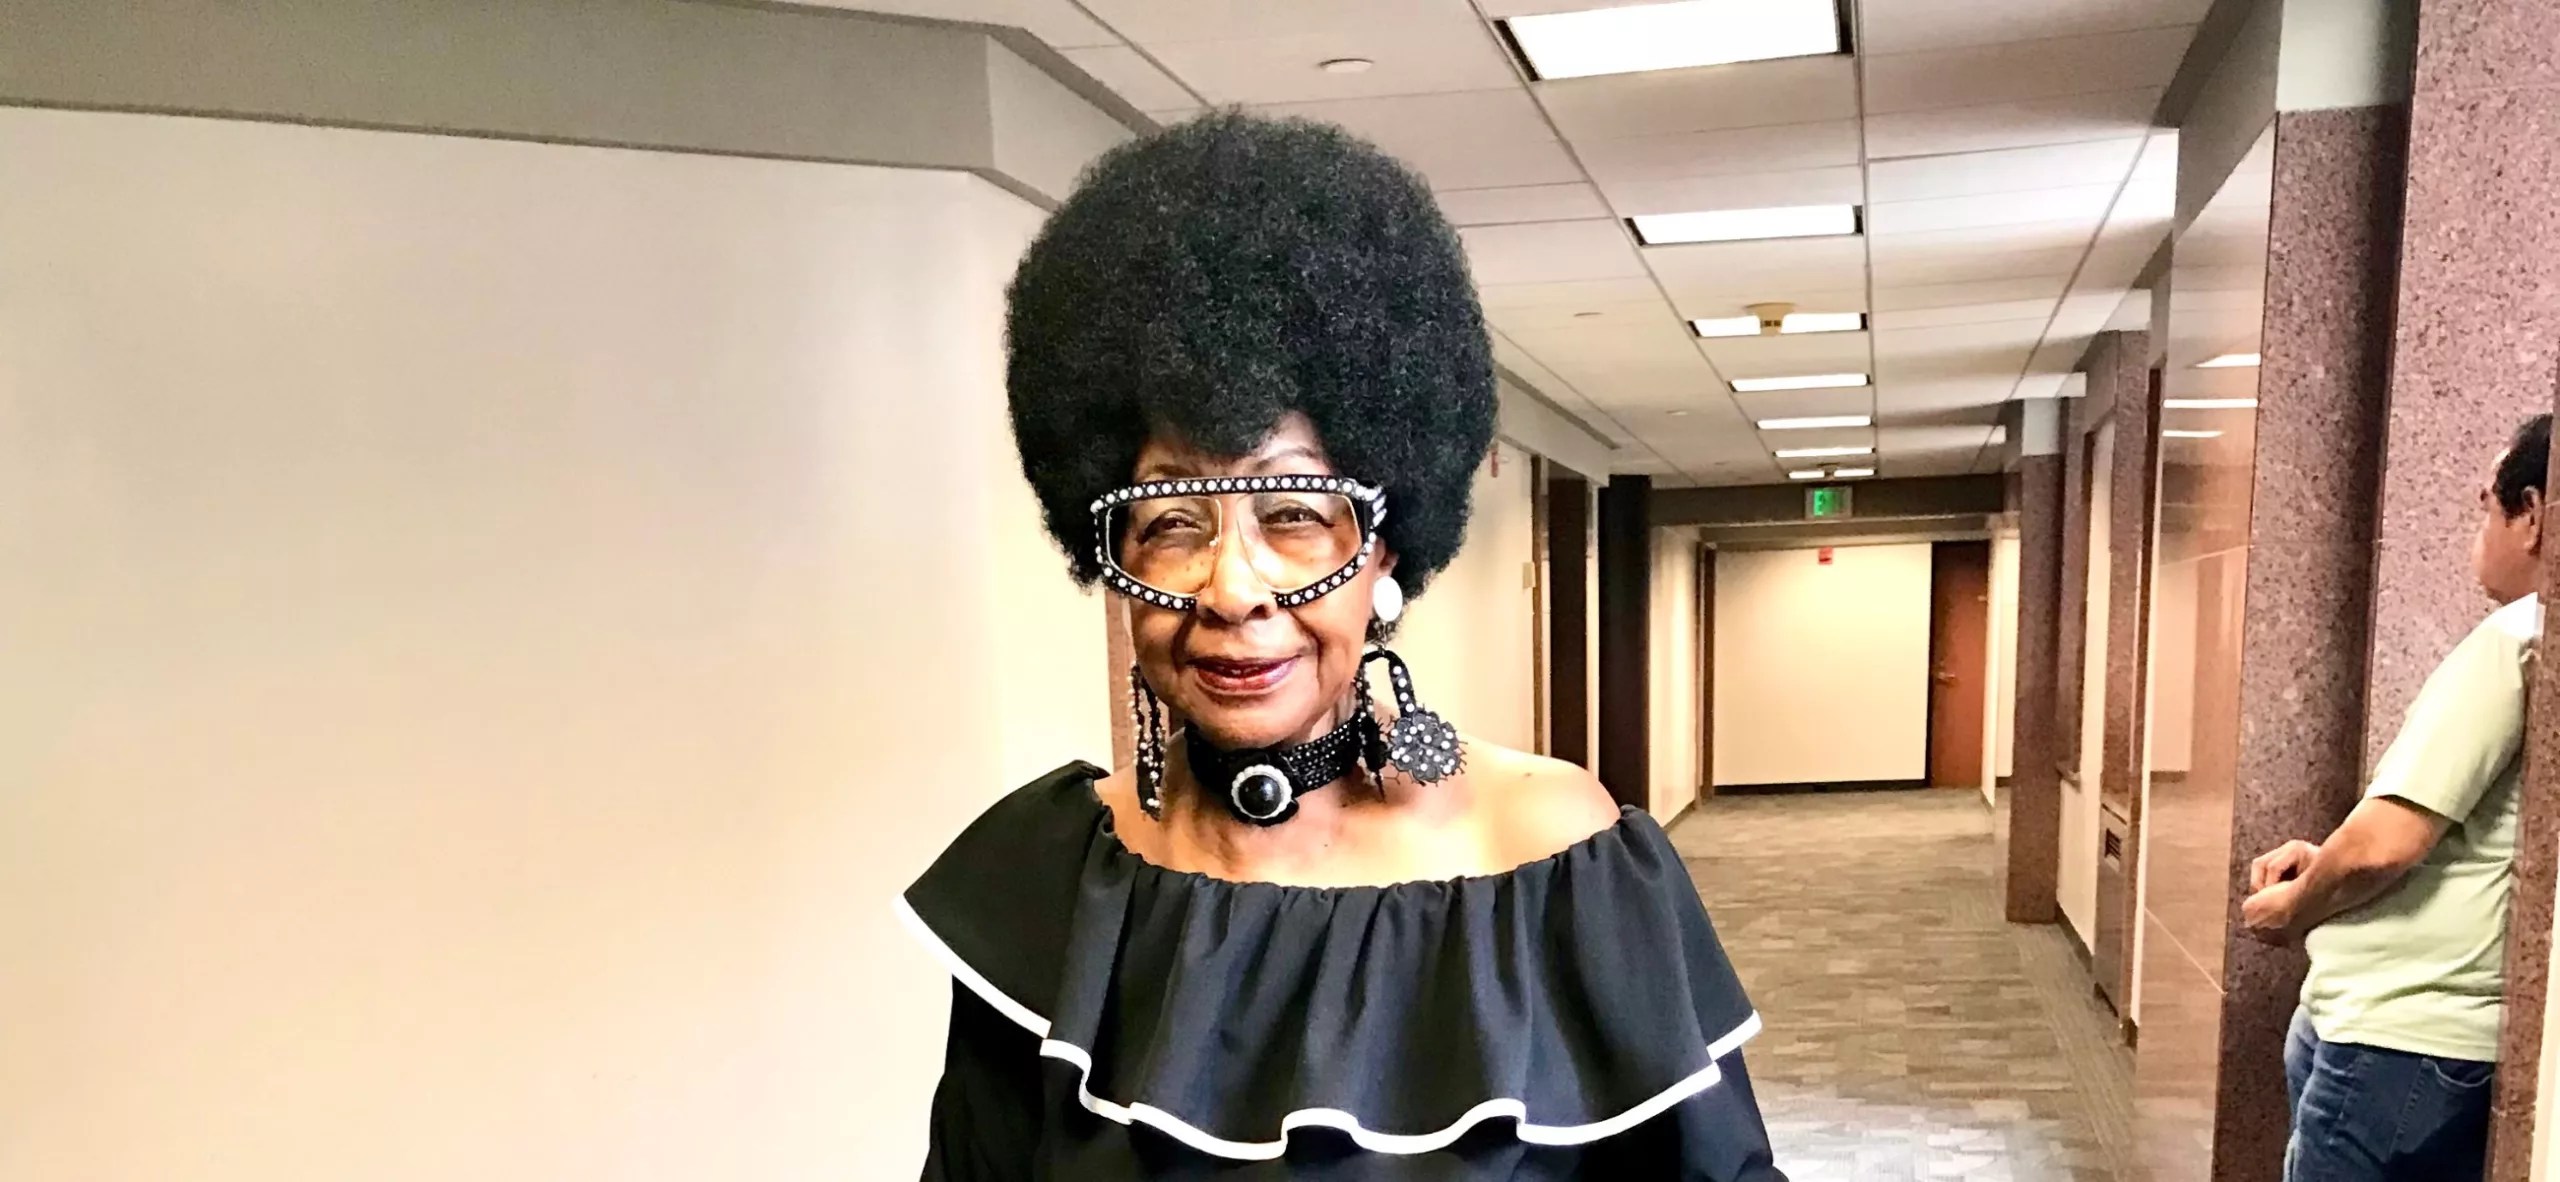 Smyrna resident Gladys Dancy, 83, told the Georgia Senate Urban Affairs Committee members that her landlord plans to raise her rent by 39% in October.